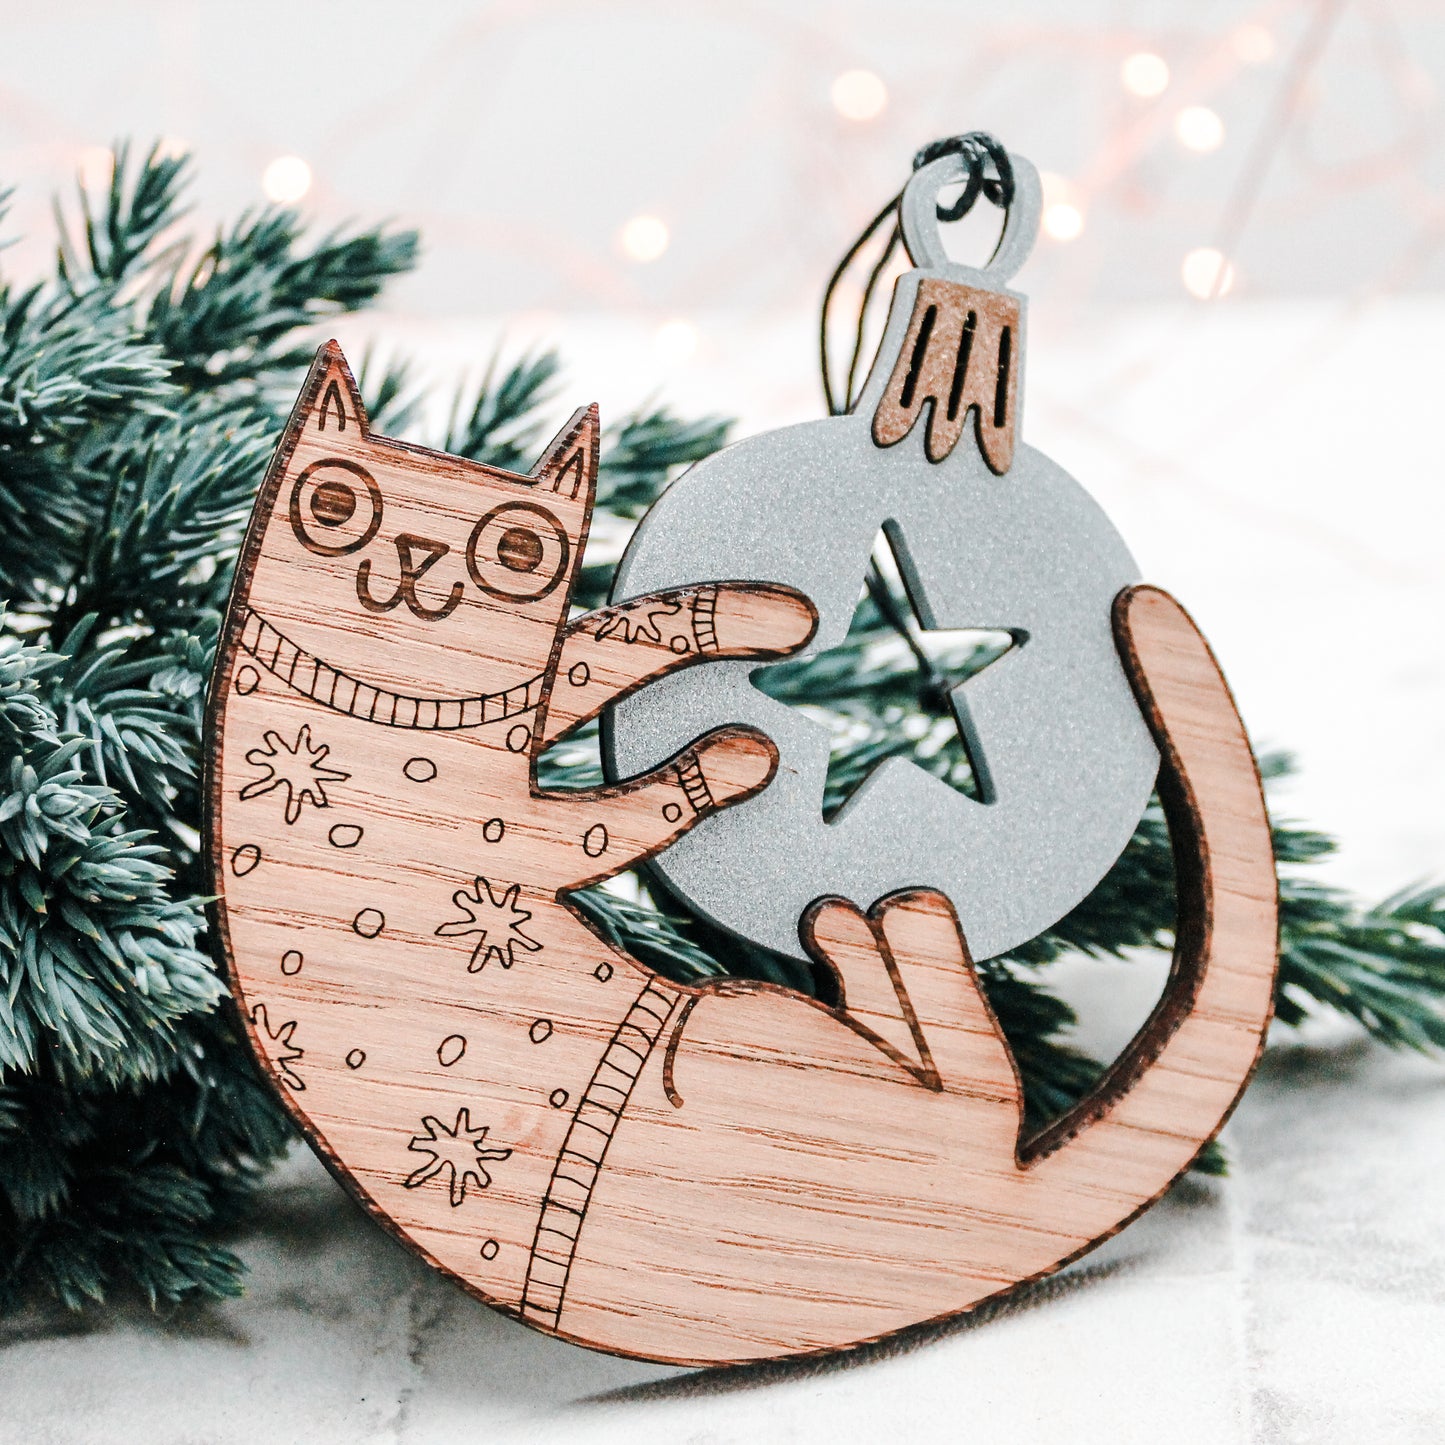 wooden Christmas cat in a festive star jumper playing with a silver Christmas bauble decoration.